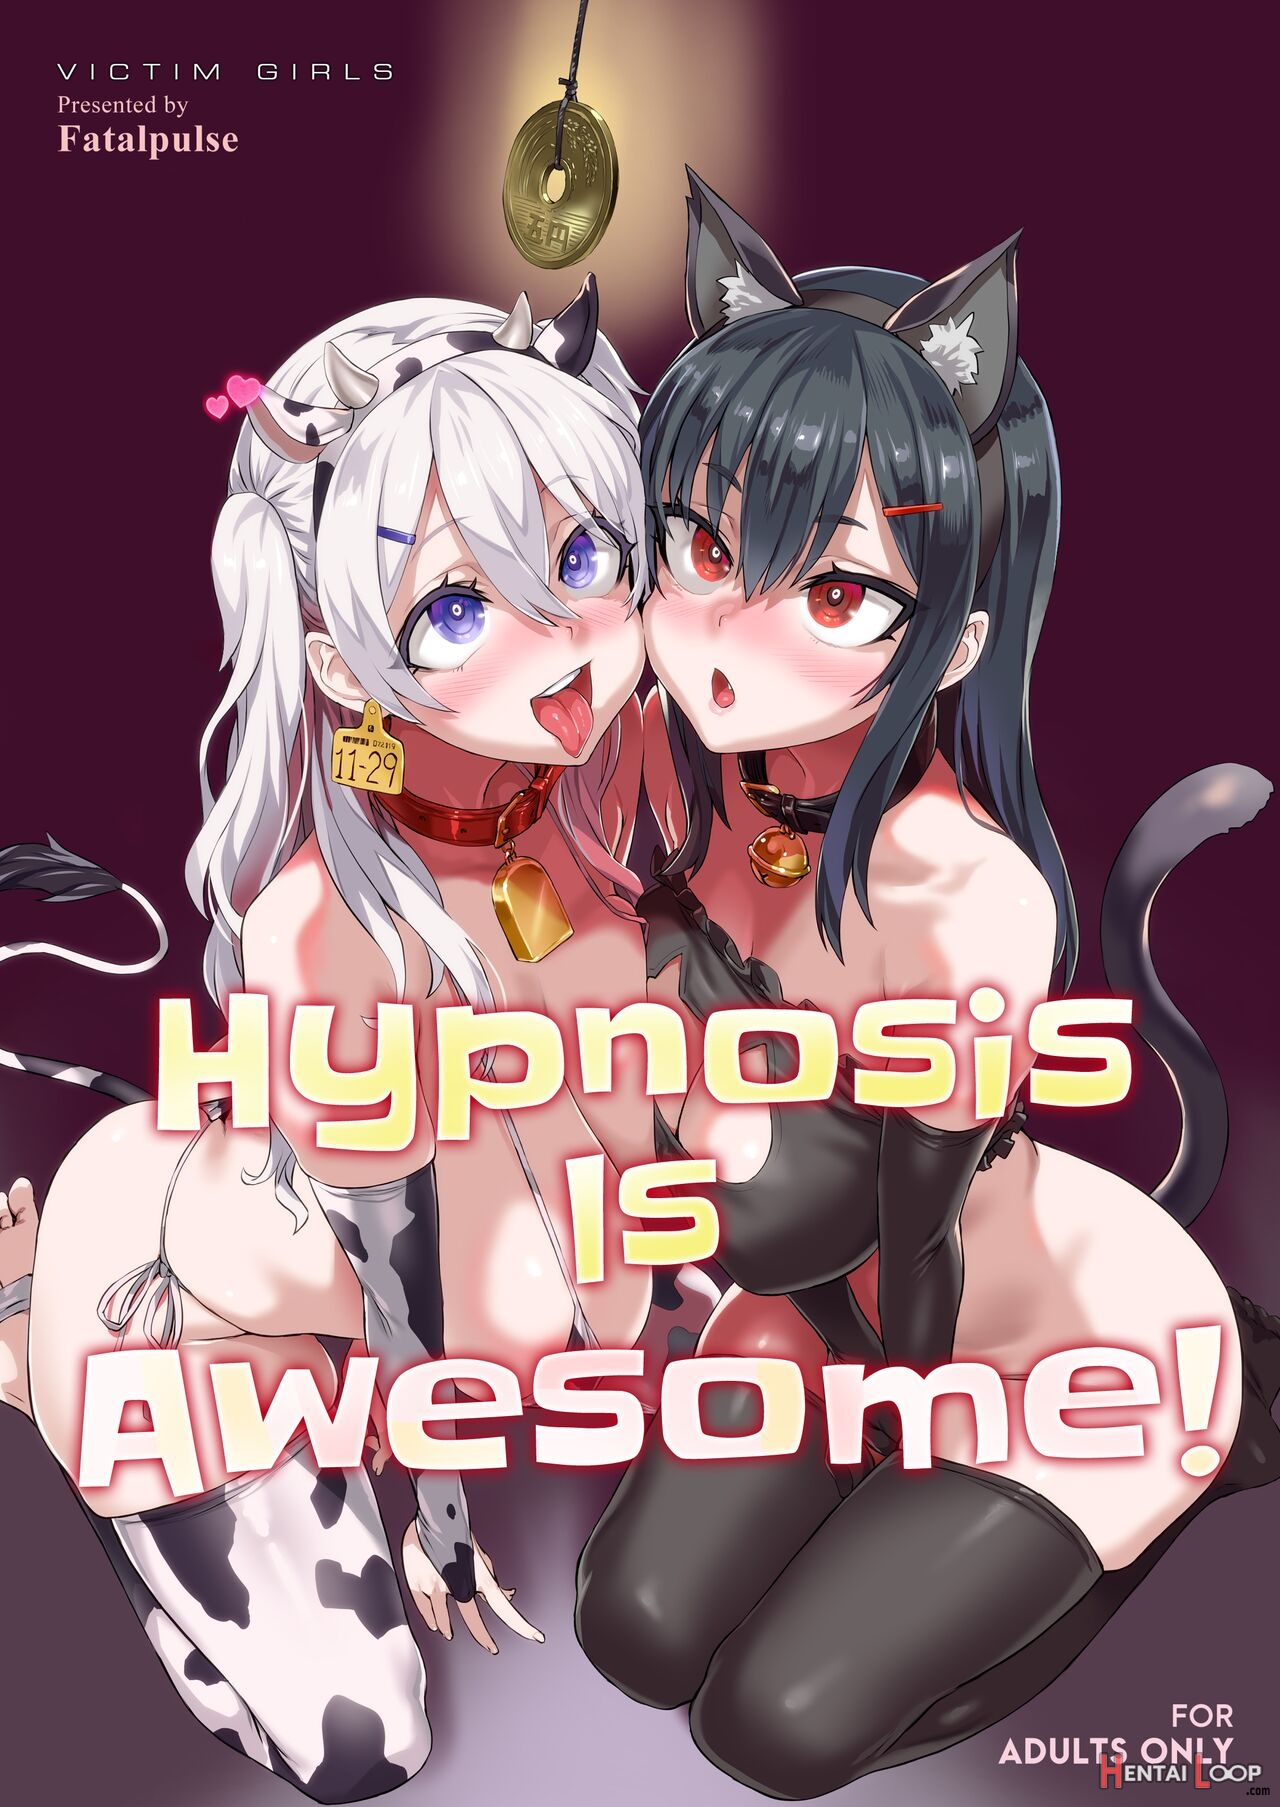 Hypnosis Is Awesome! (by Asanagi) - Hentai doujinshi for free at HentaiLoop